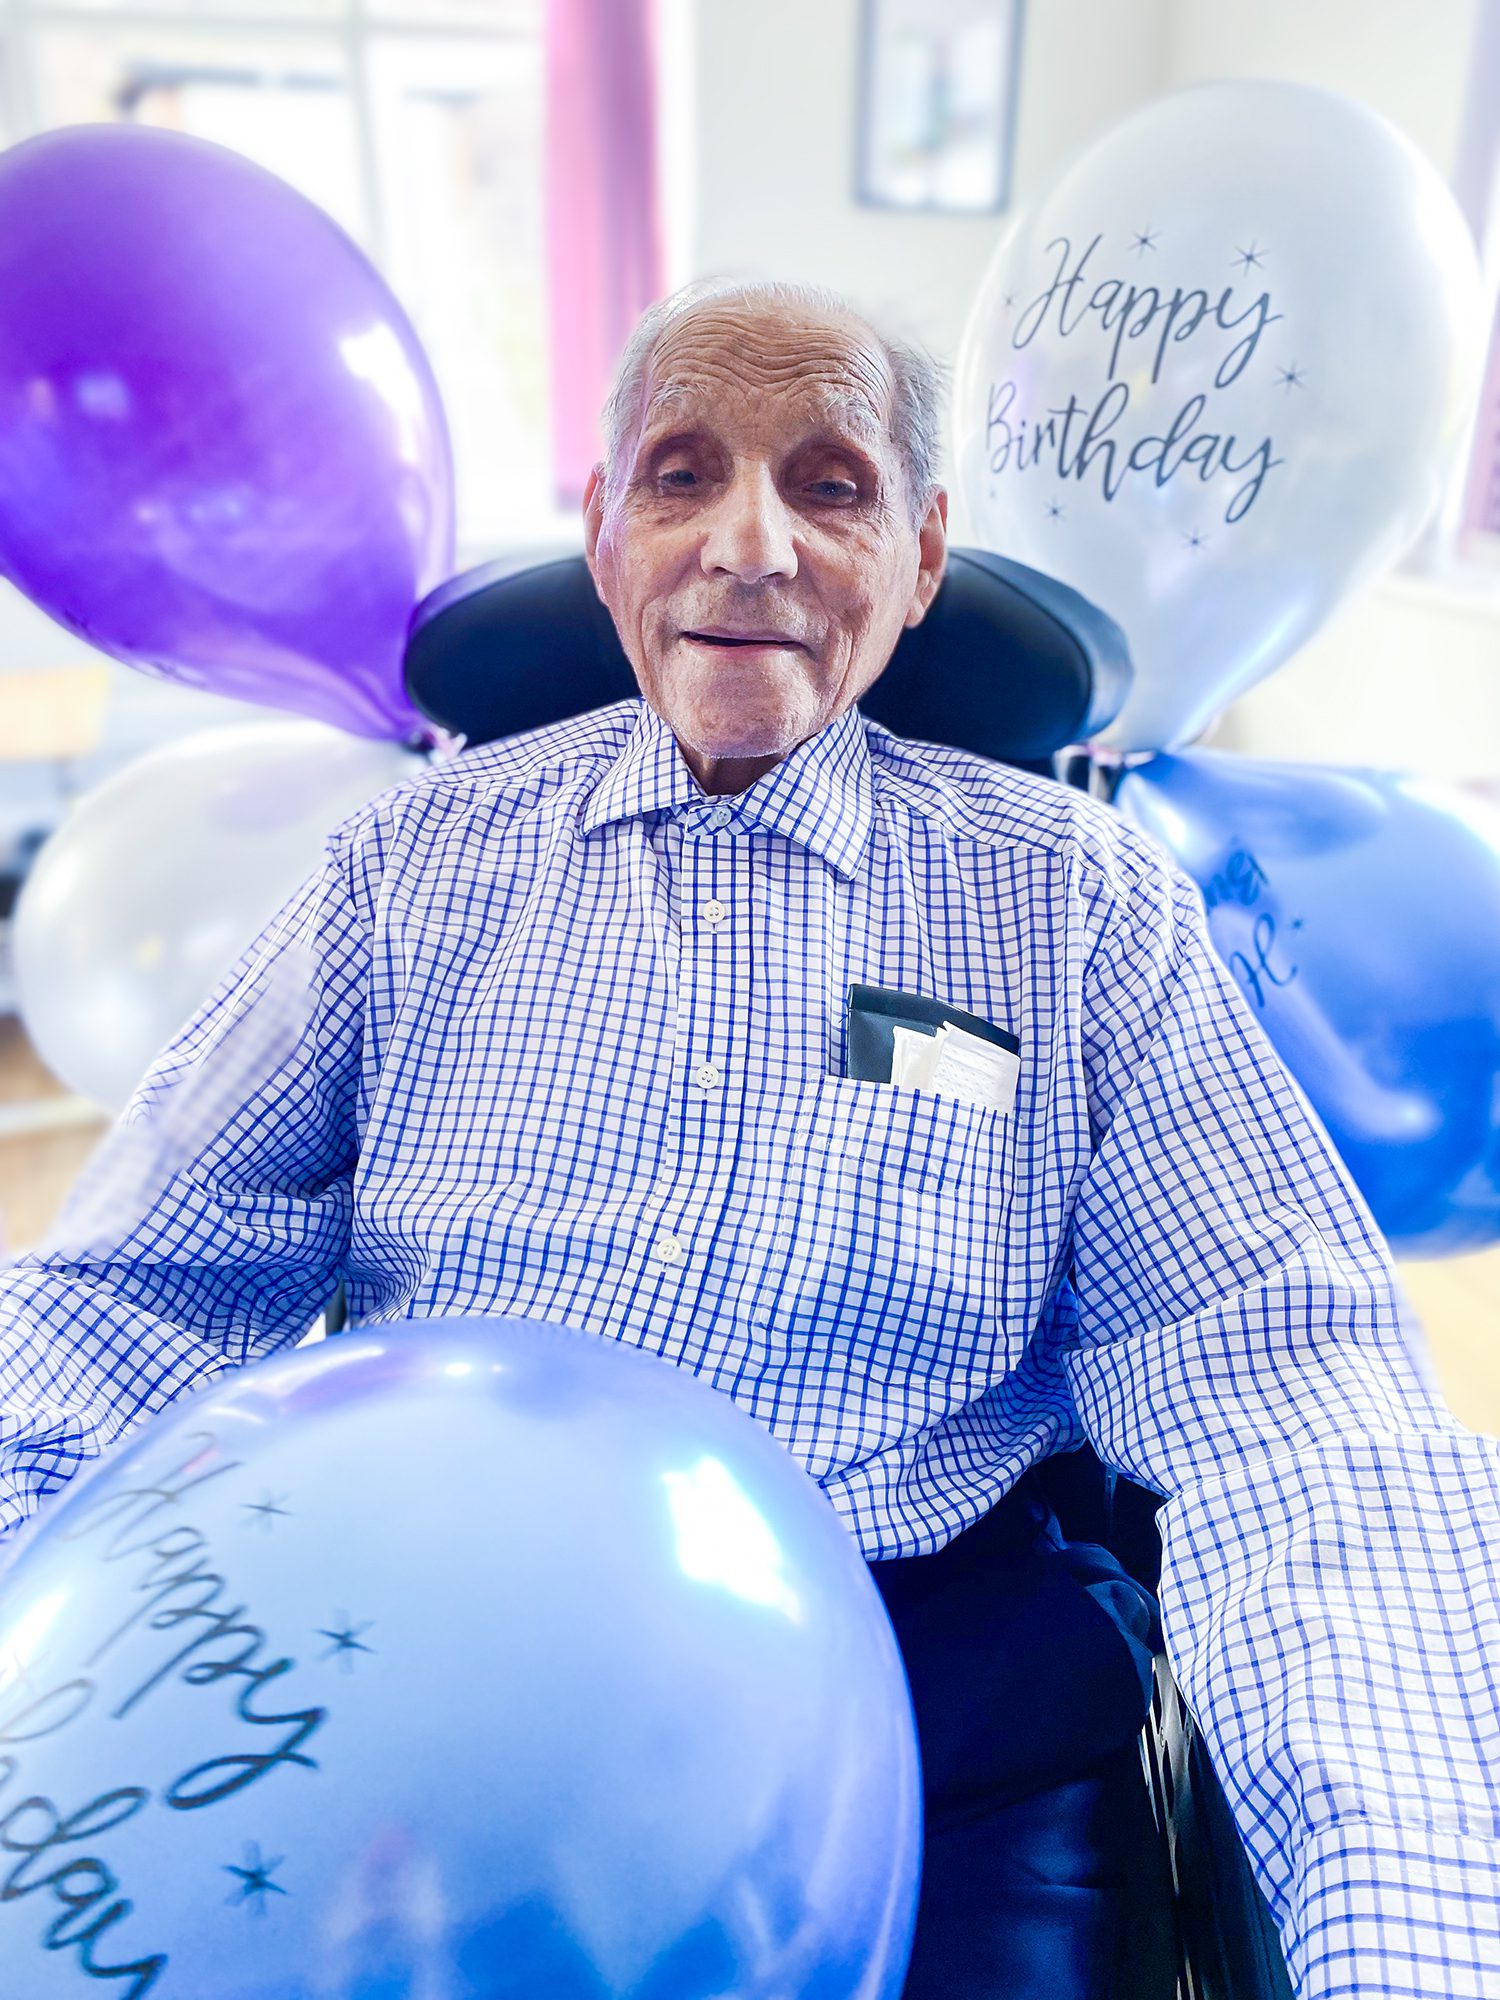 Cedric surrounded by balloons on his 101st Birthday.